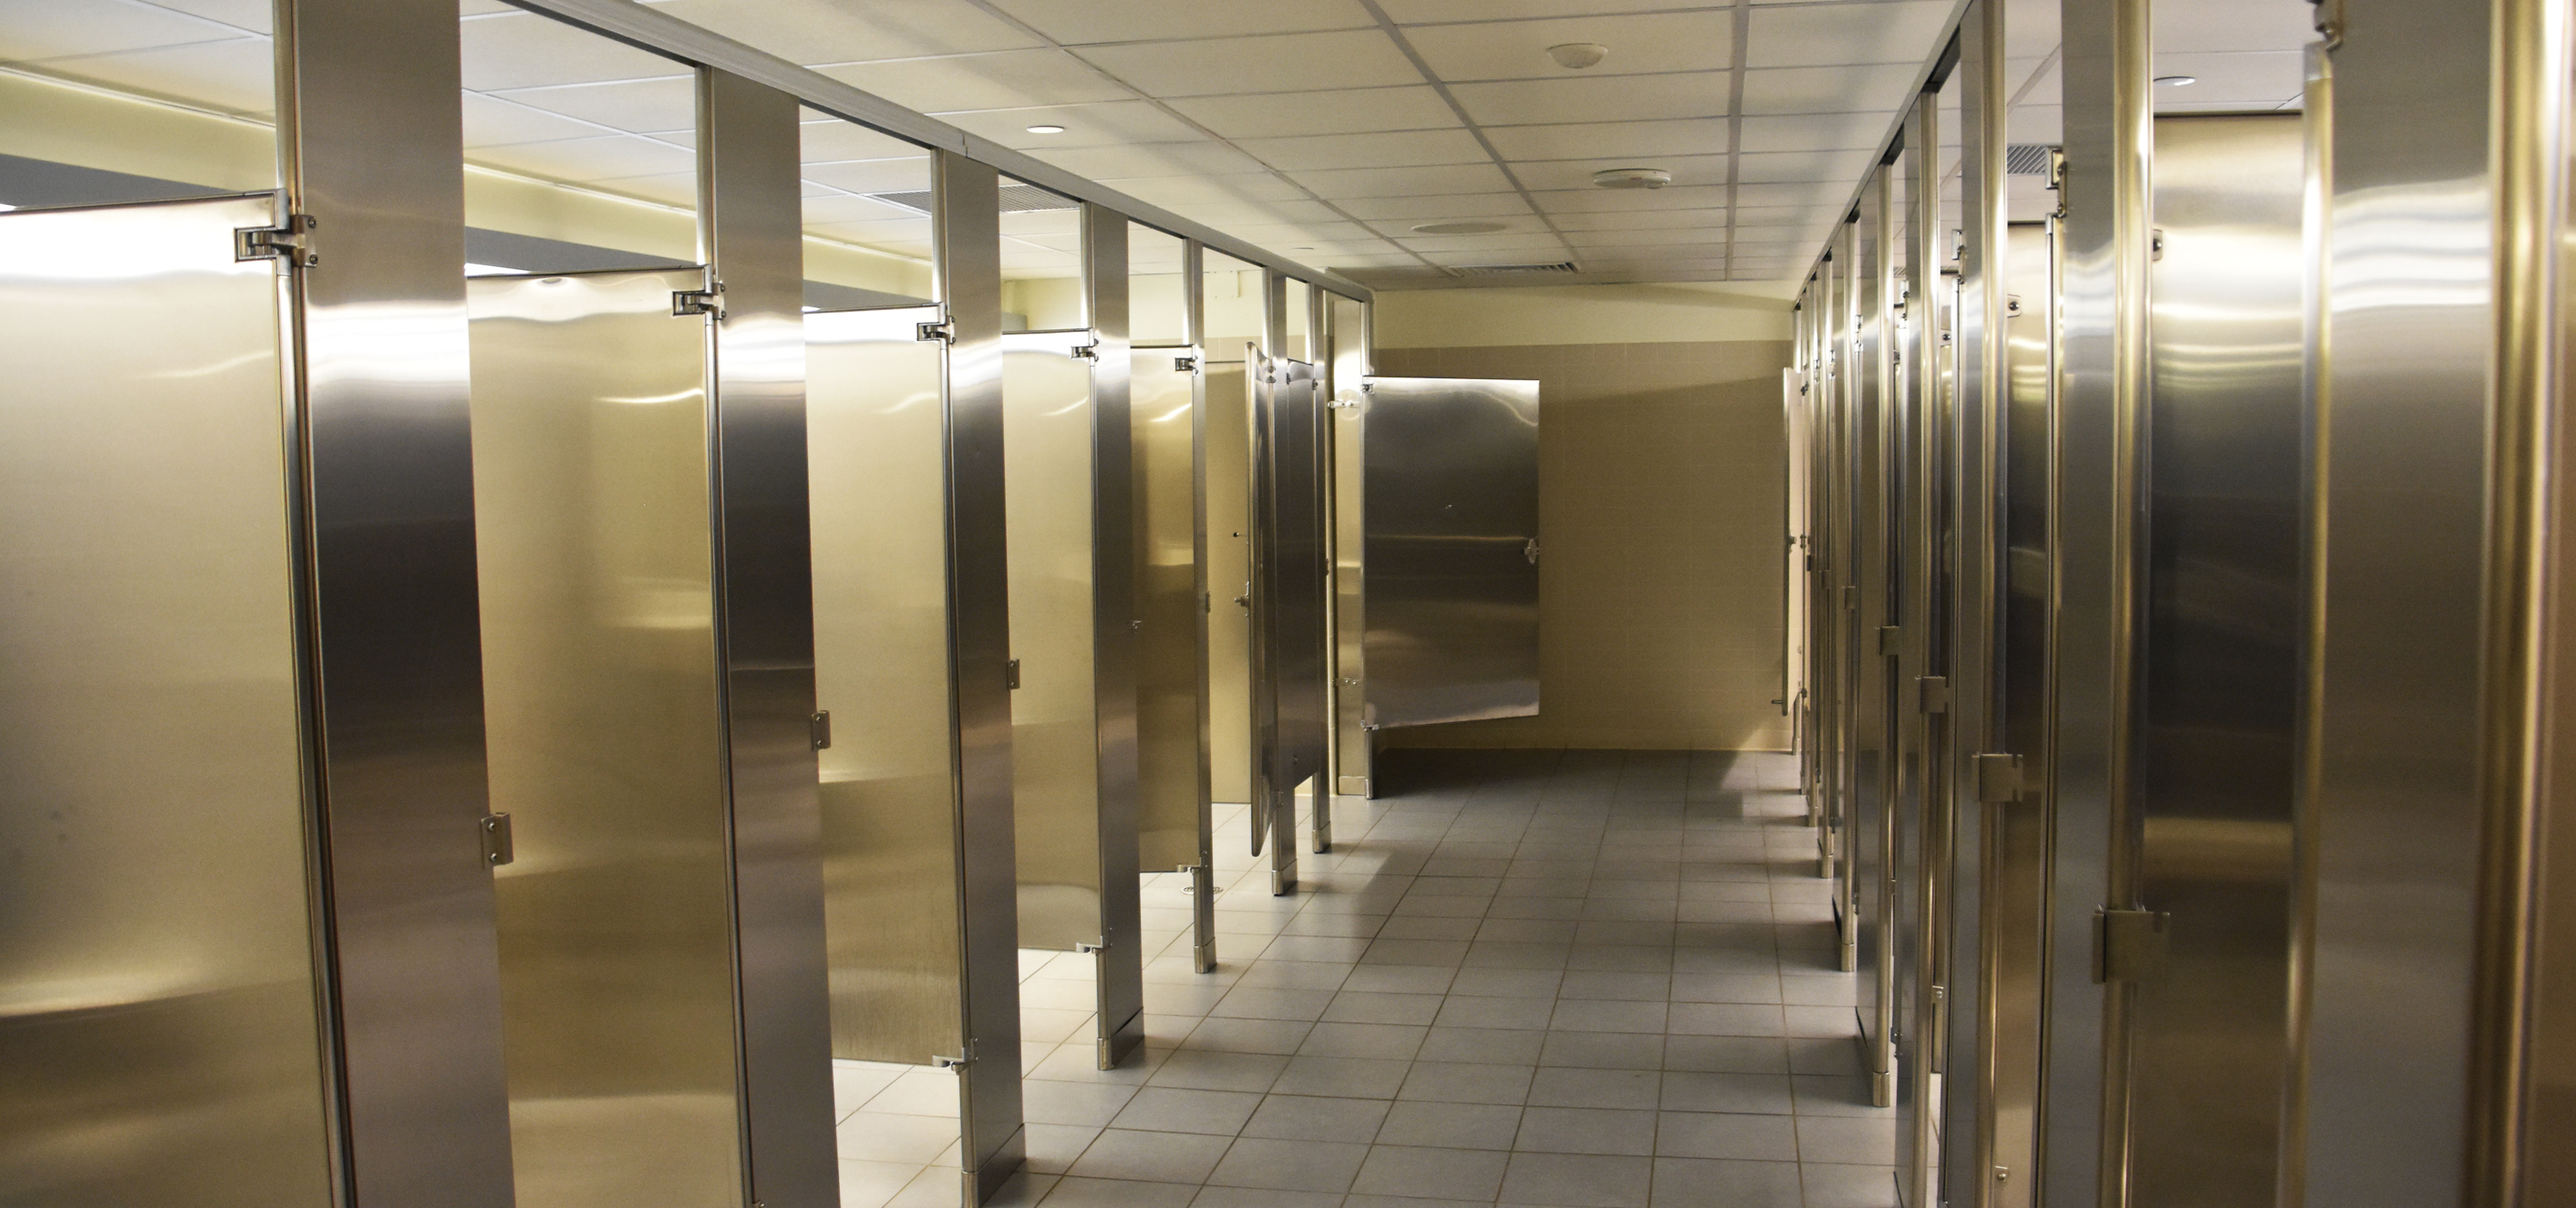 A perspective shot of a bathroom aisle banked on either side with 16 total stainless steel bathroom partitions, overhead brace, installed wall-to-wall style.